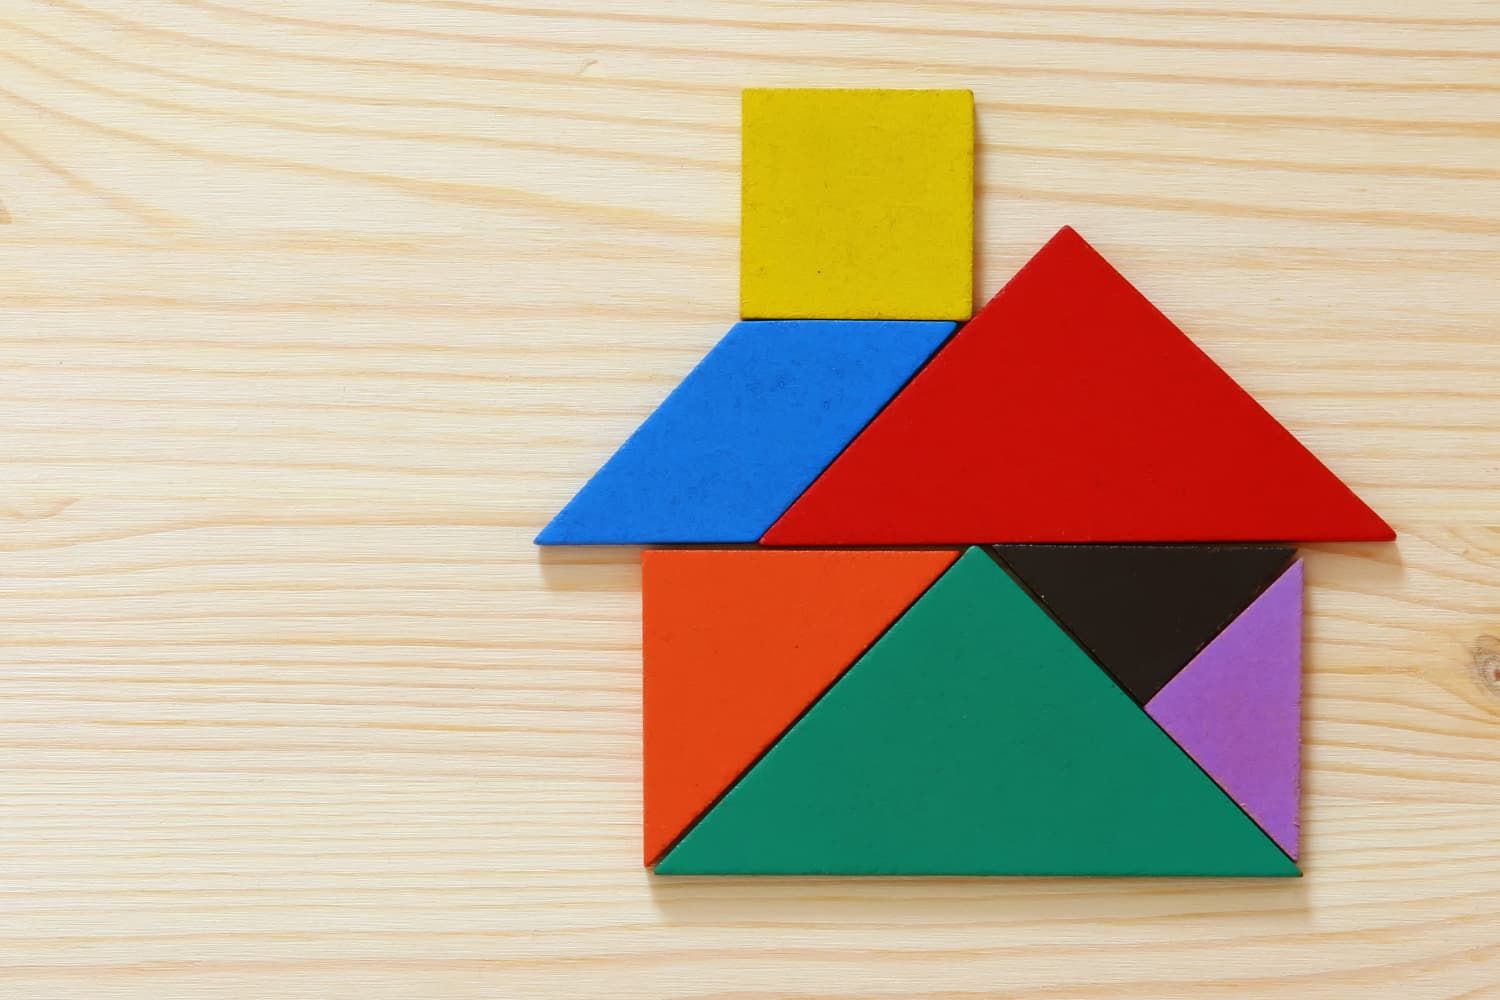 Tangram%20house-9434101a Jesus - His miracles